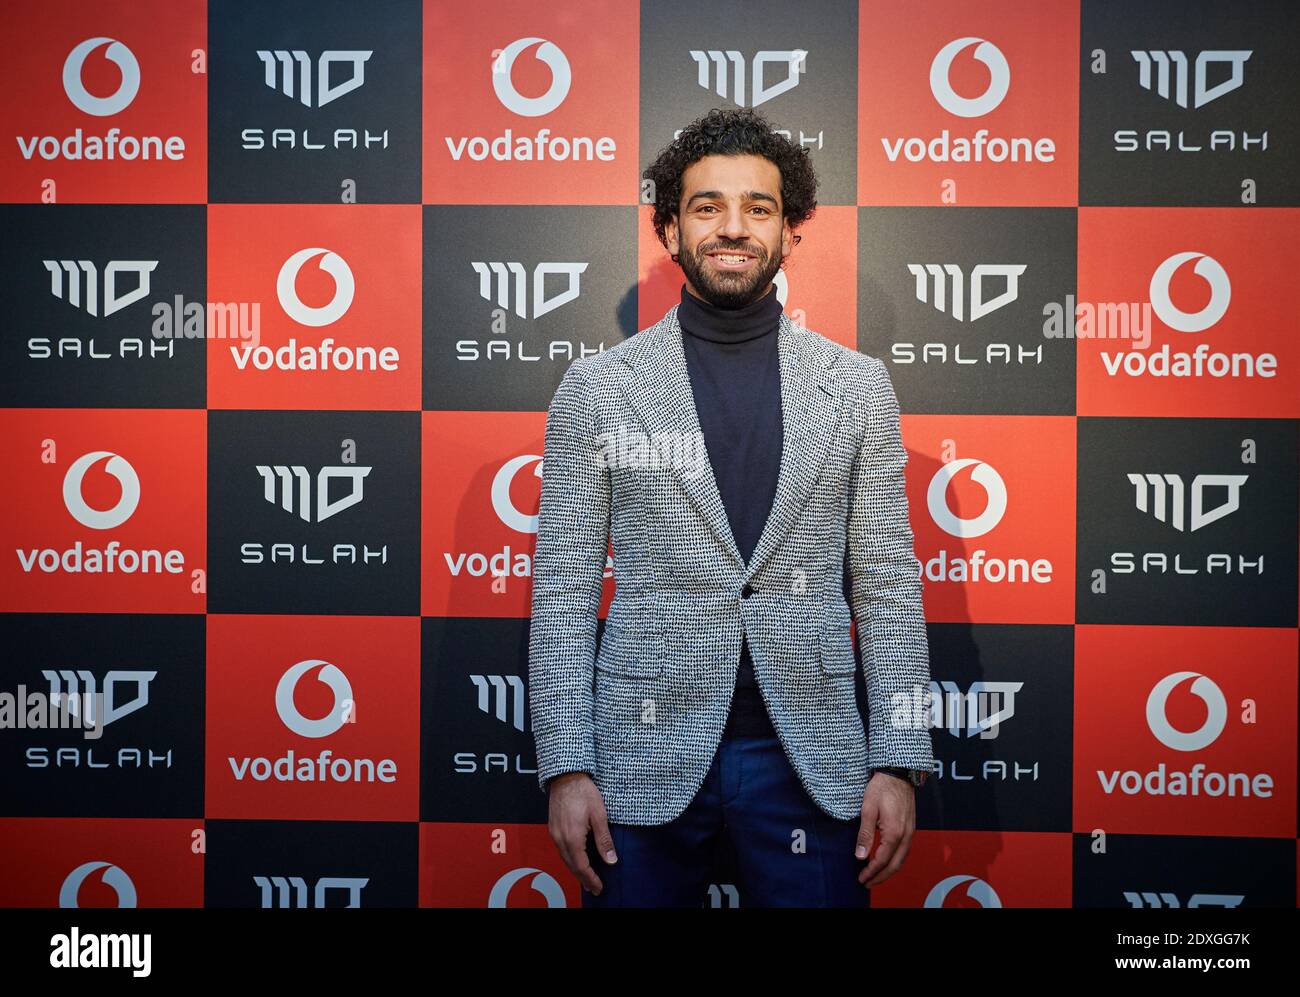 Mohamed Salah Hamed Mahrous Ghaly is an Egyptian professional footballer who plays as a forward for Premier League club Liverpool. Stock Photo